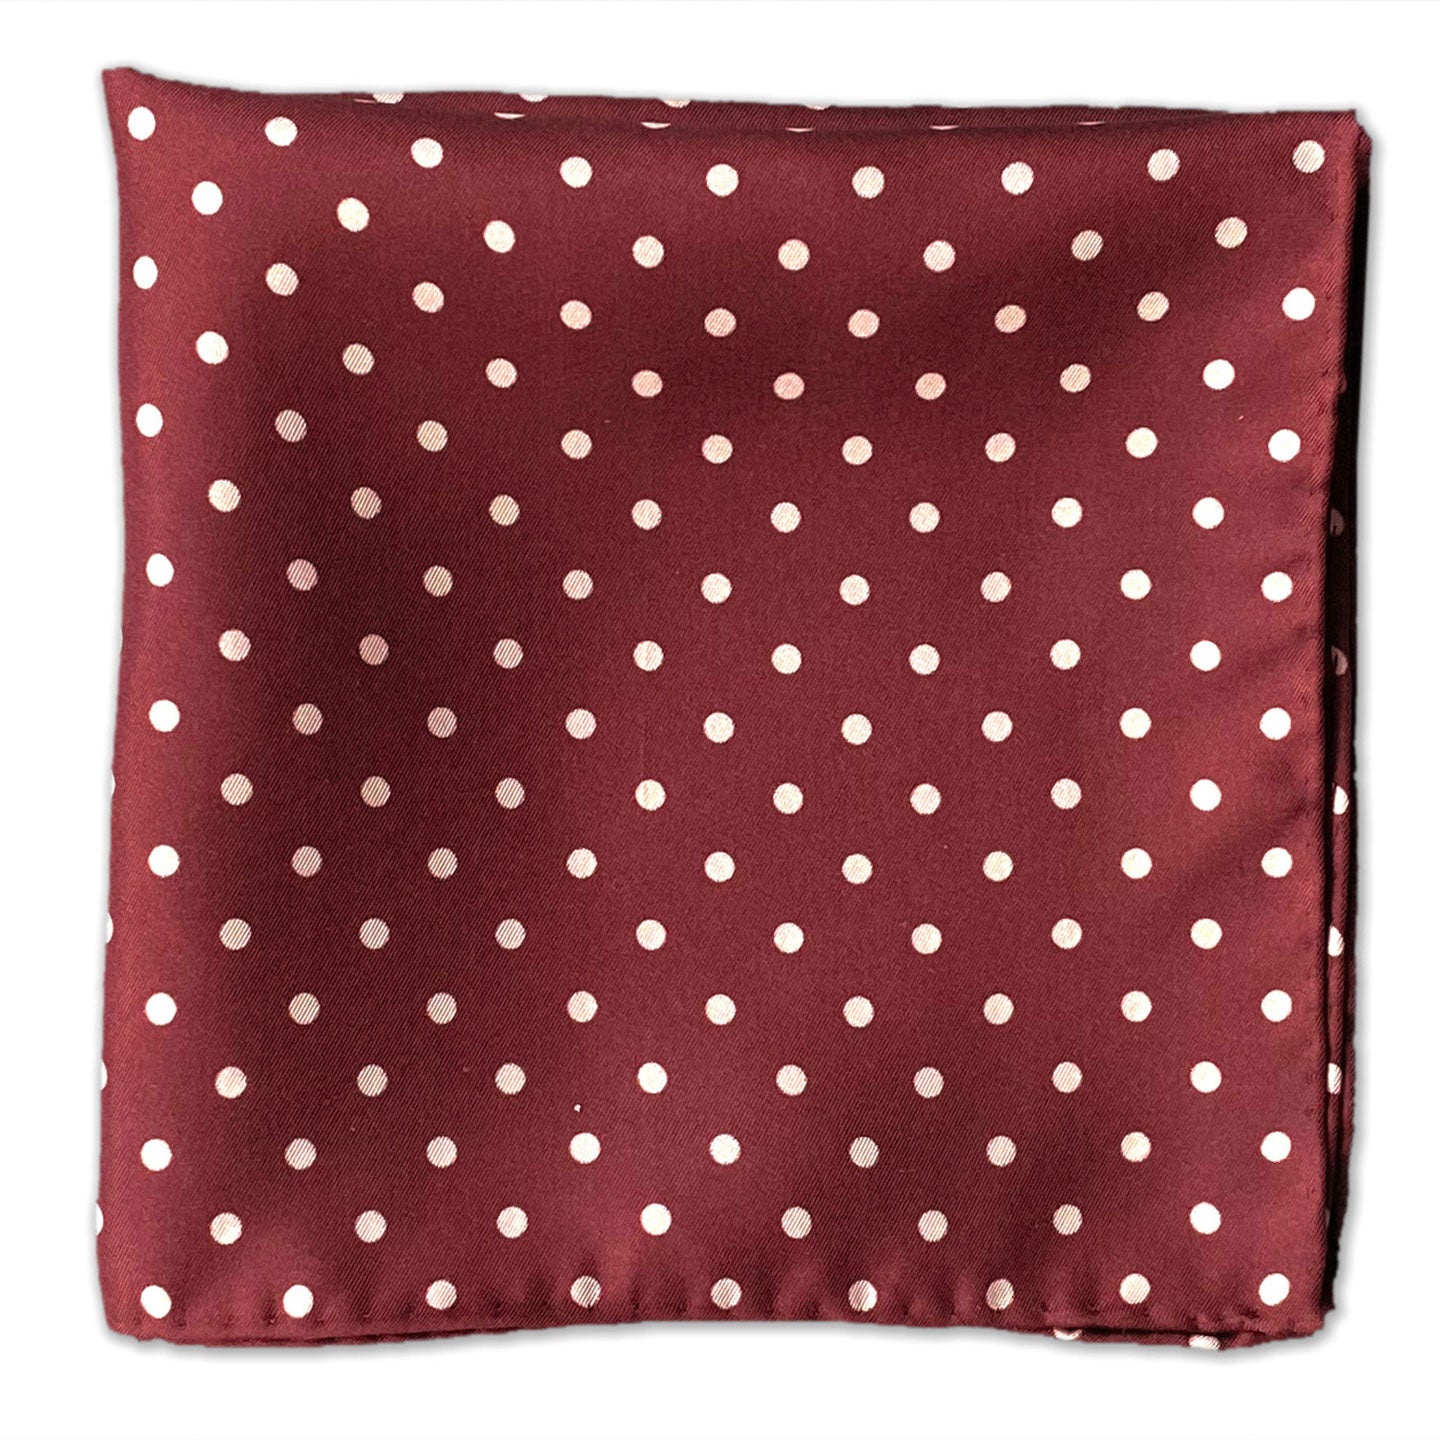 Flat view of the 'Sapporo' polka dot patterned silk pocket square set on a deep red fabric background.